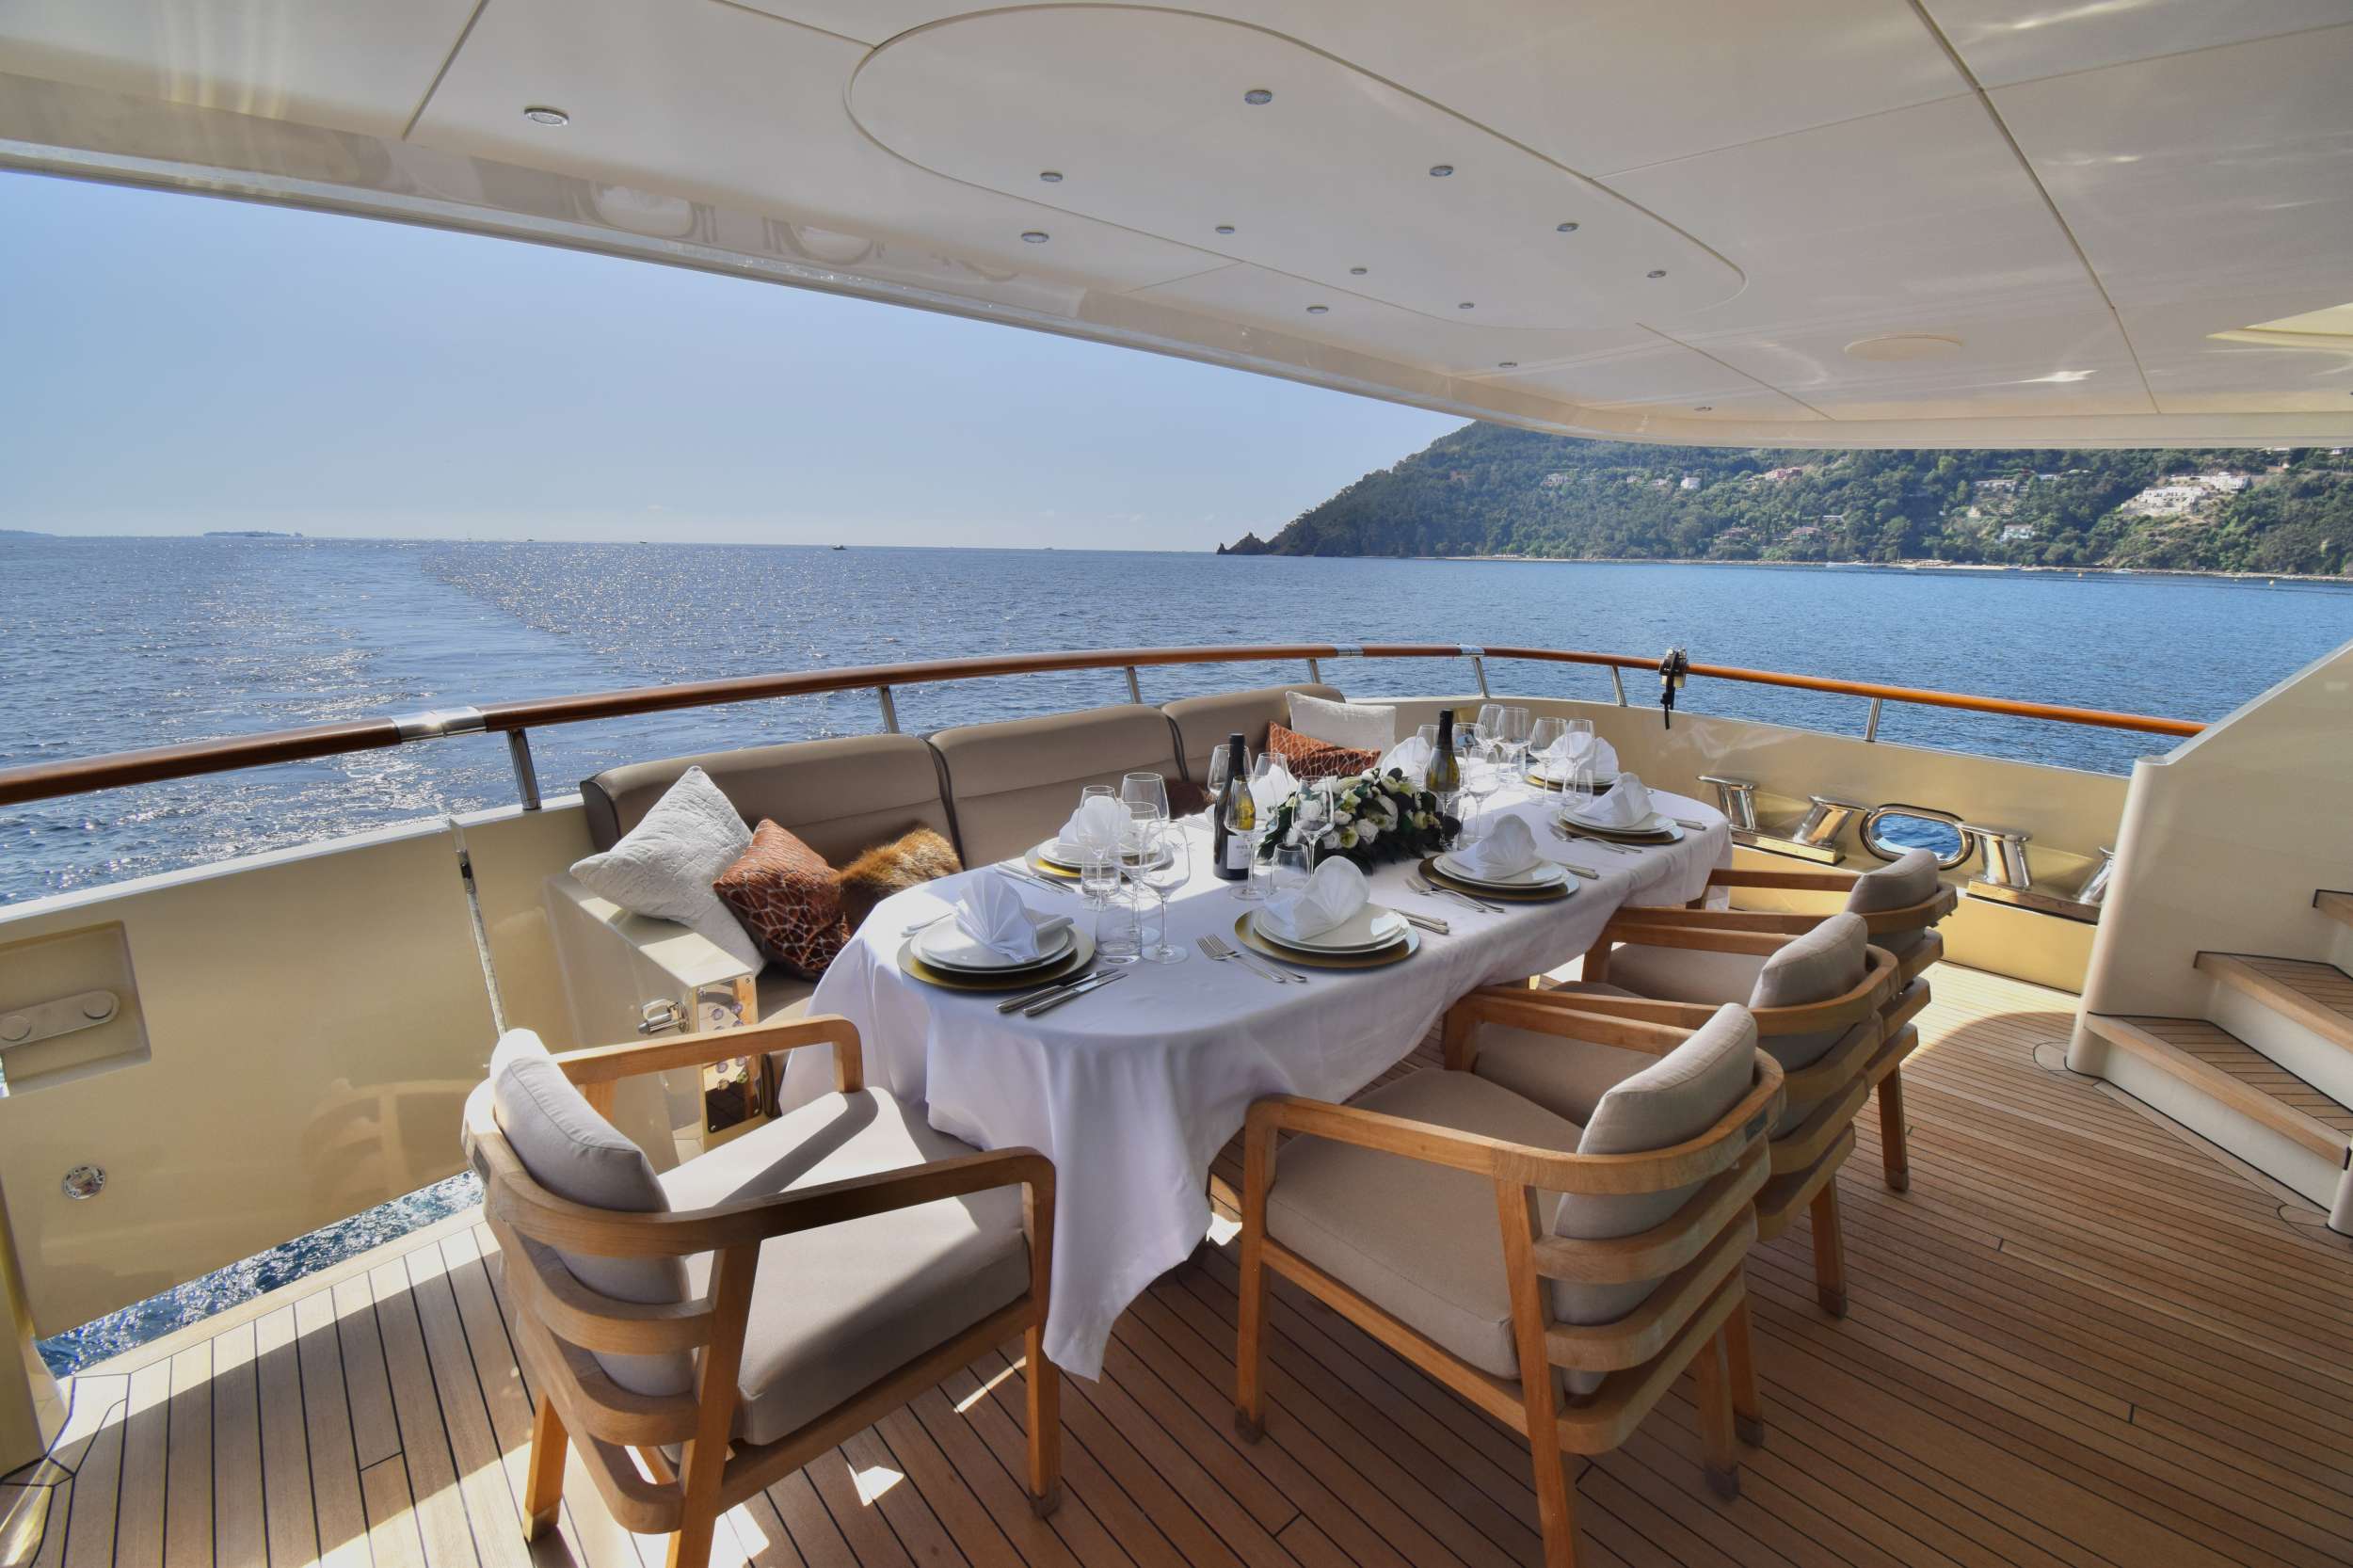 ORIZZONTE - Yacht Charter Cyprus & Boat hire in W. Med -Naples/Sicily, W. Med -Riviera/Cors/Sard., W. Med - Spain/Balearics 3